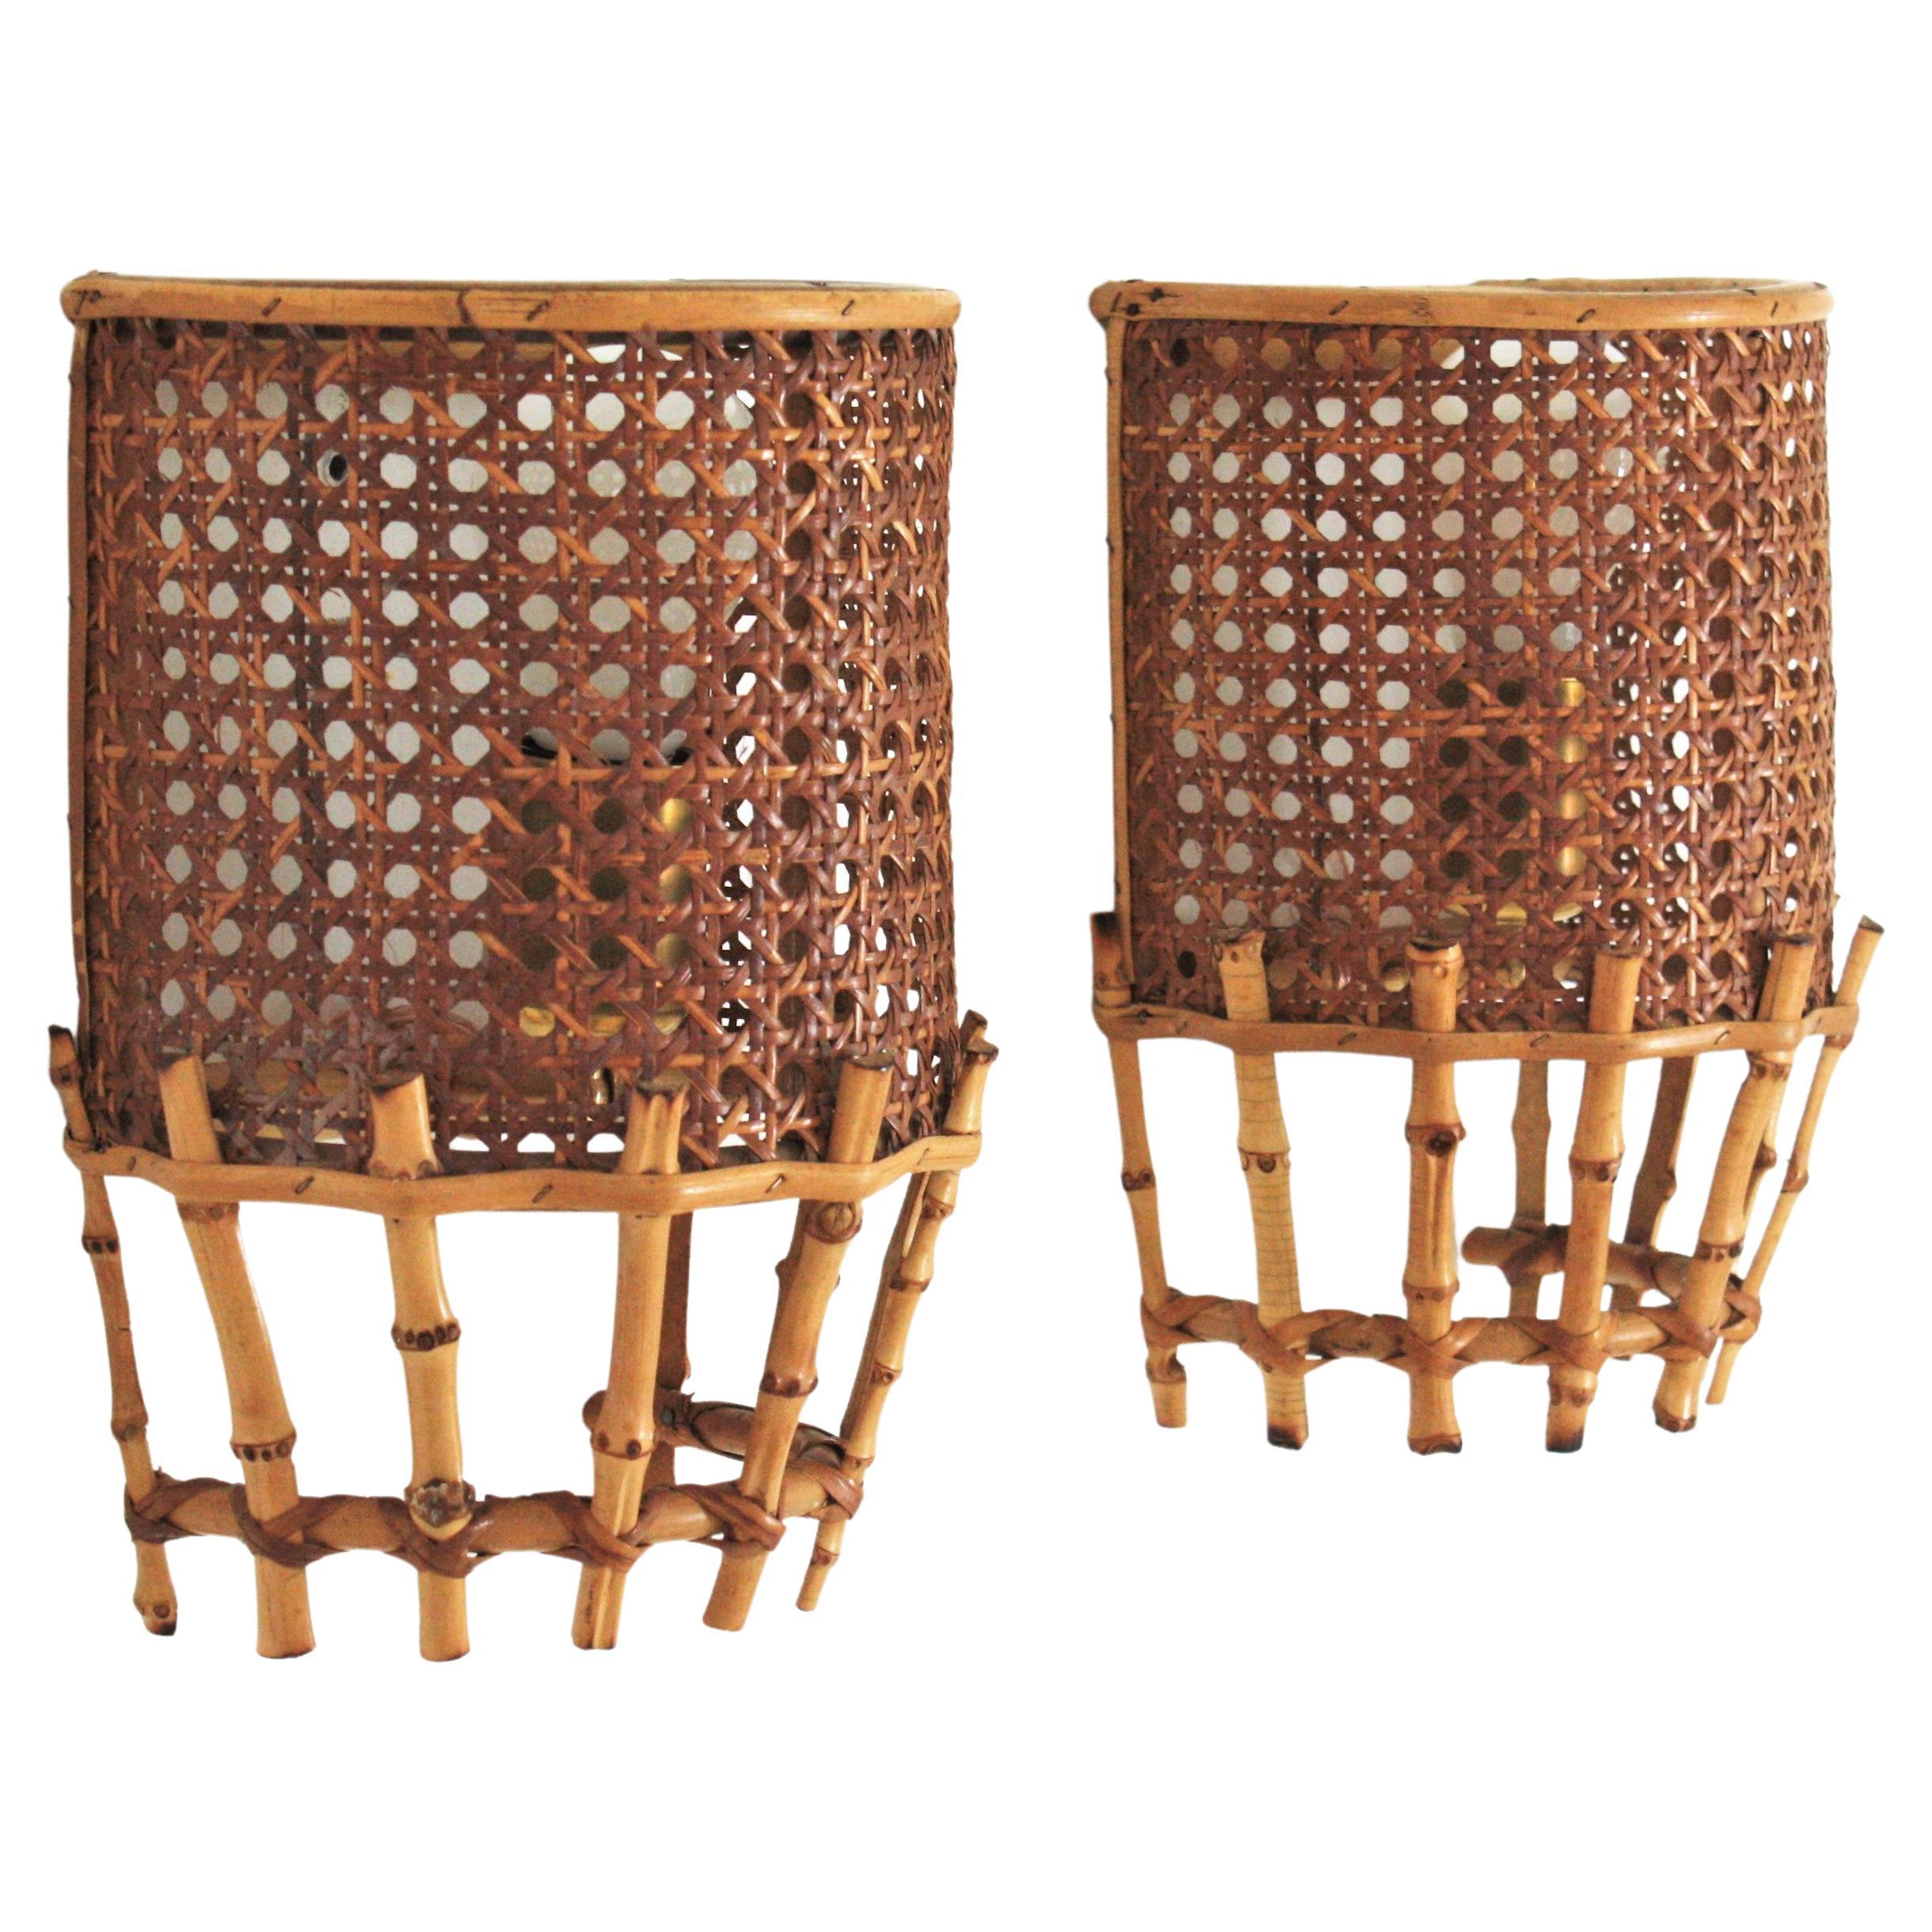 Pair of Midcentury Woven Wicker Weave and Bamboo Wall Sconces